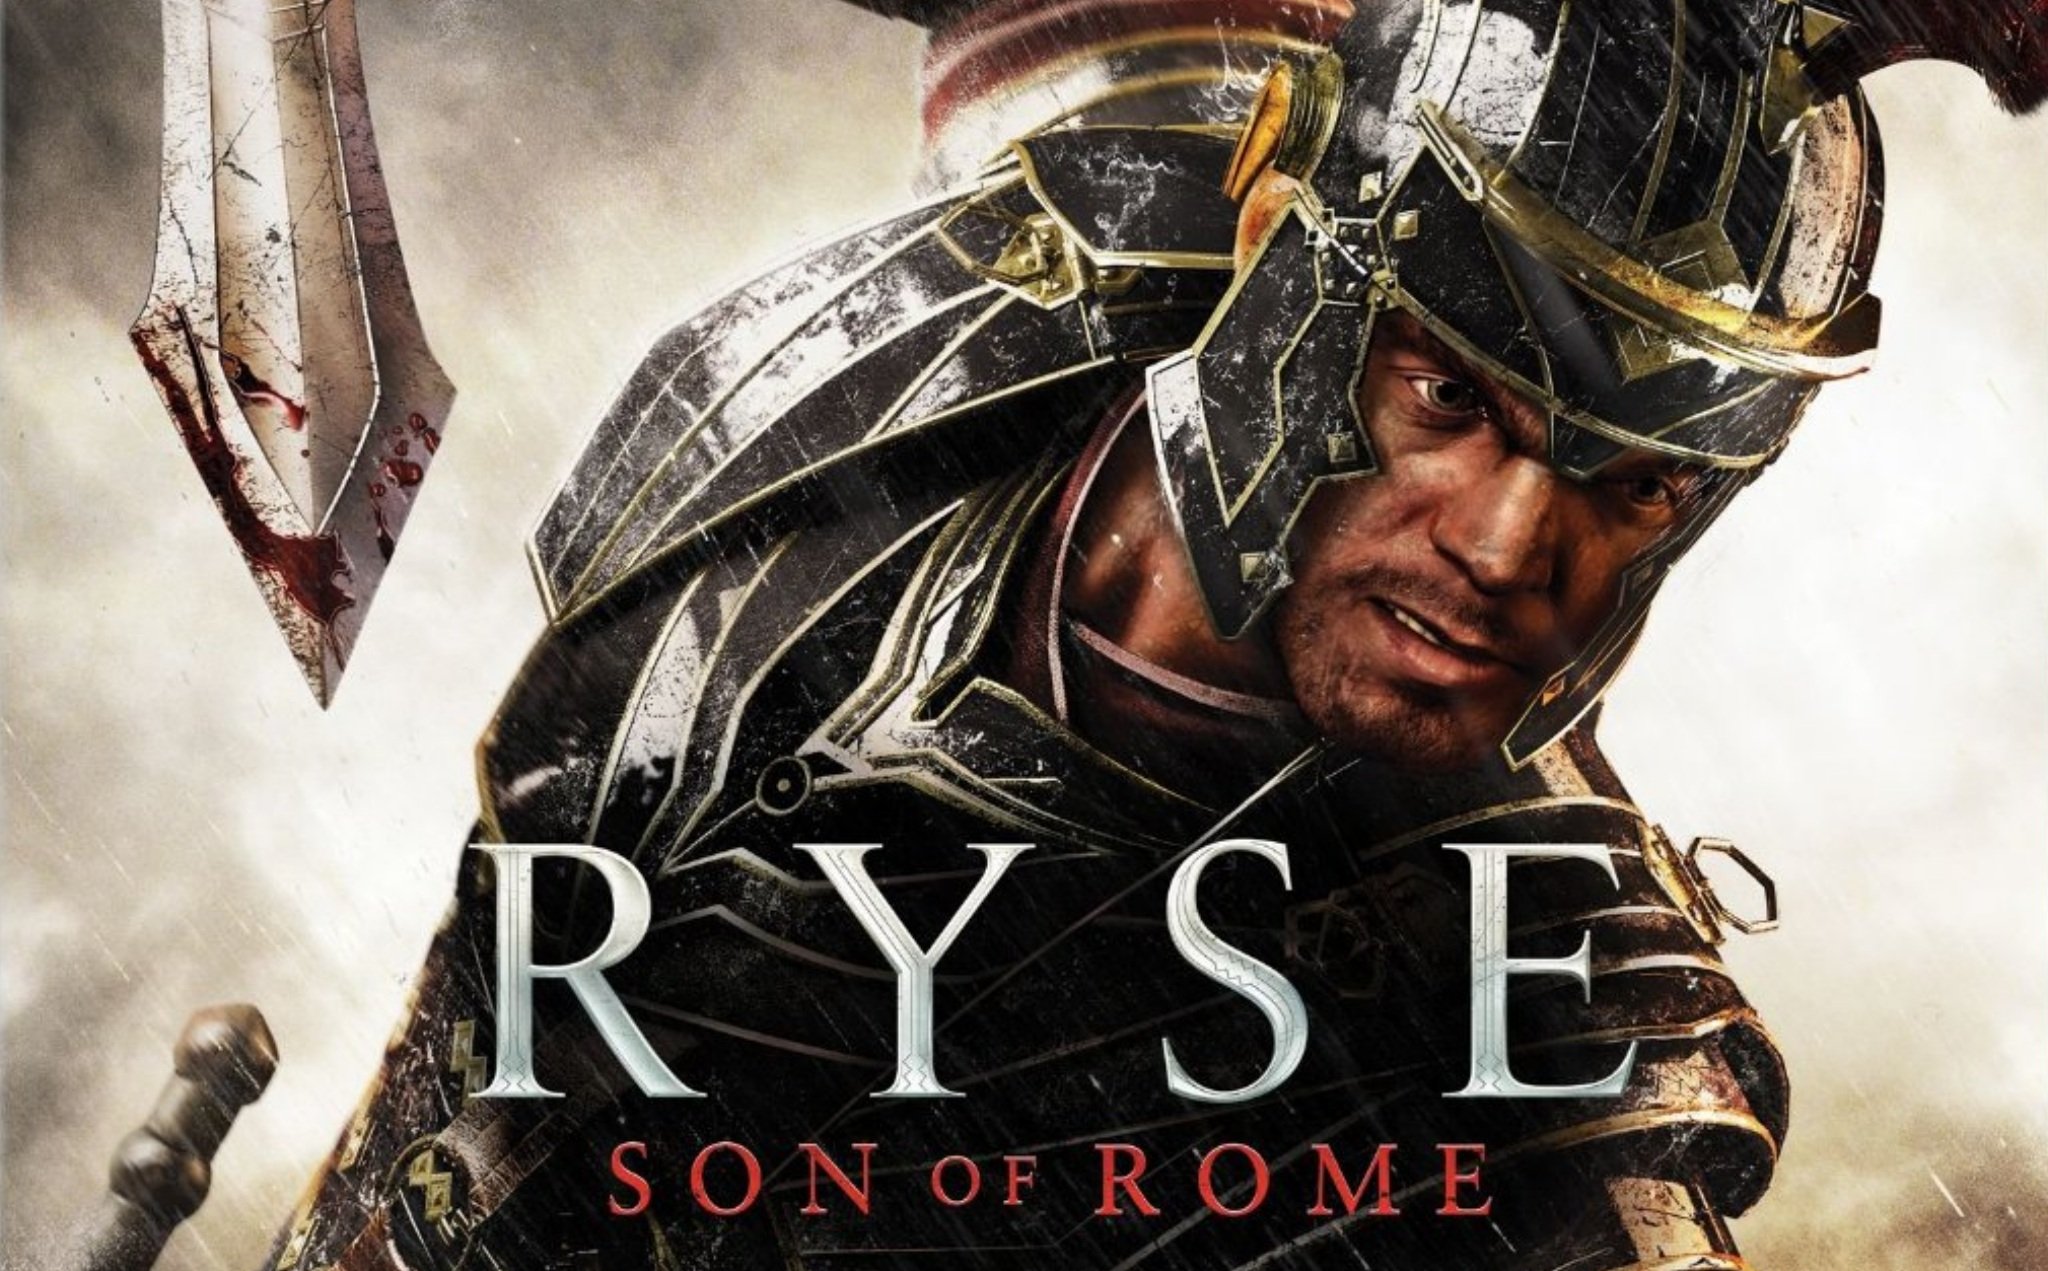 Microsoft gives free Ryse game to some Sunset Overdrive console owners